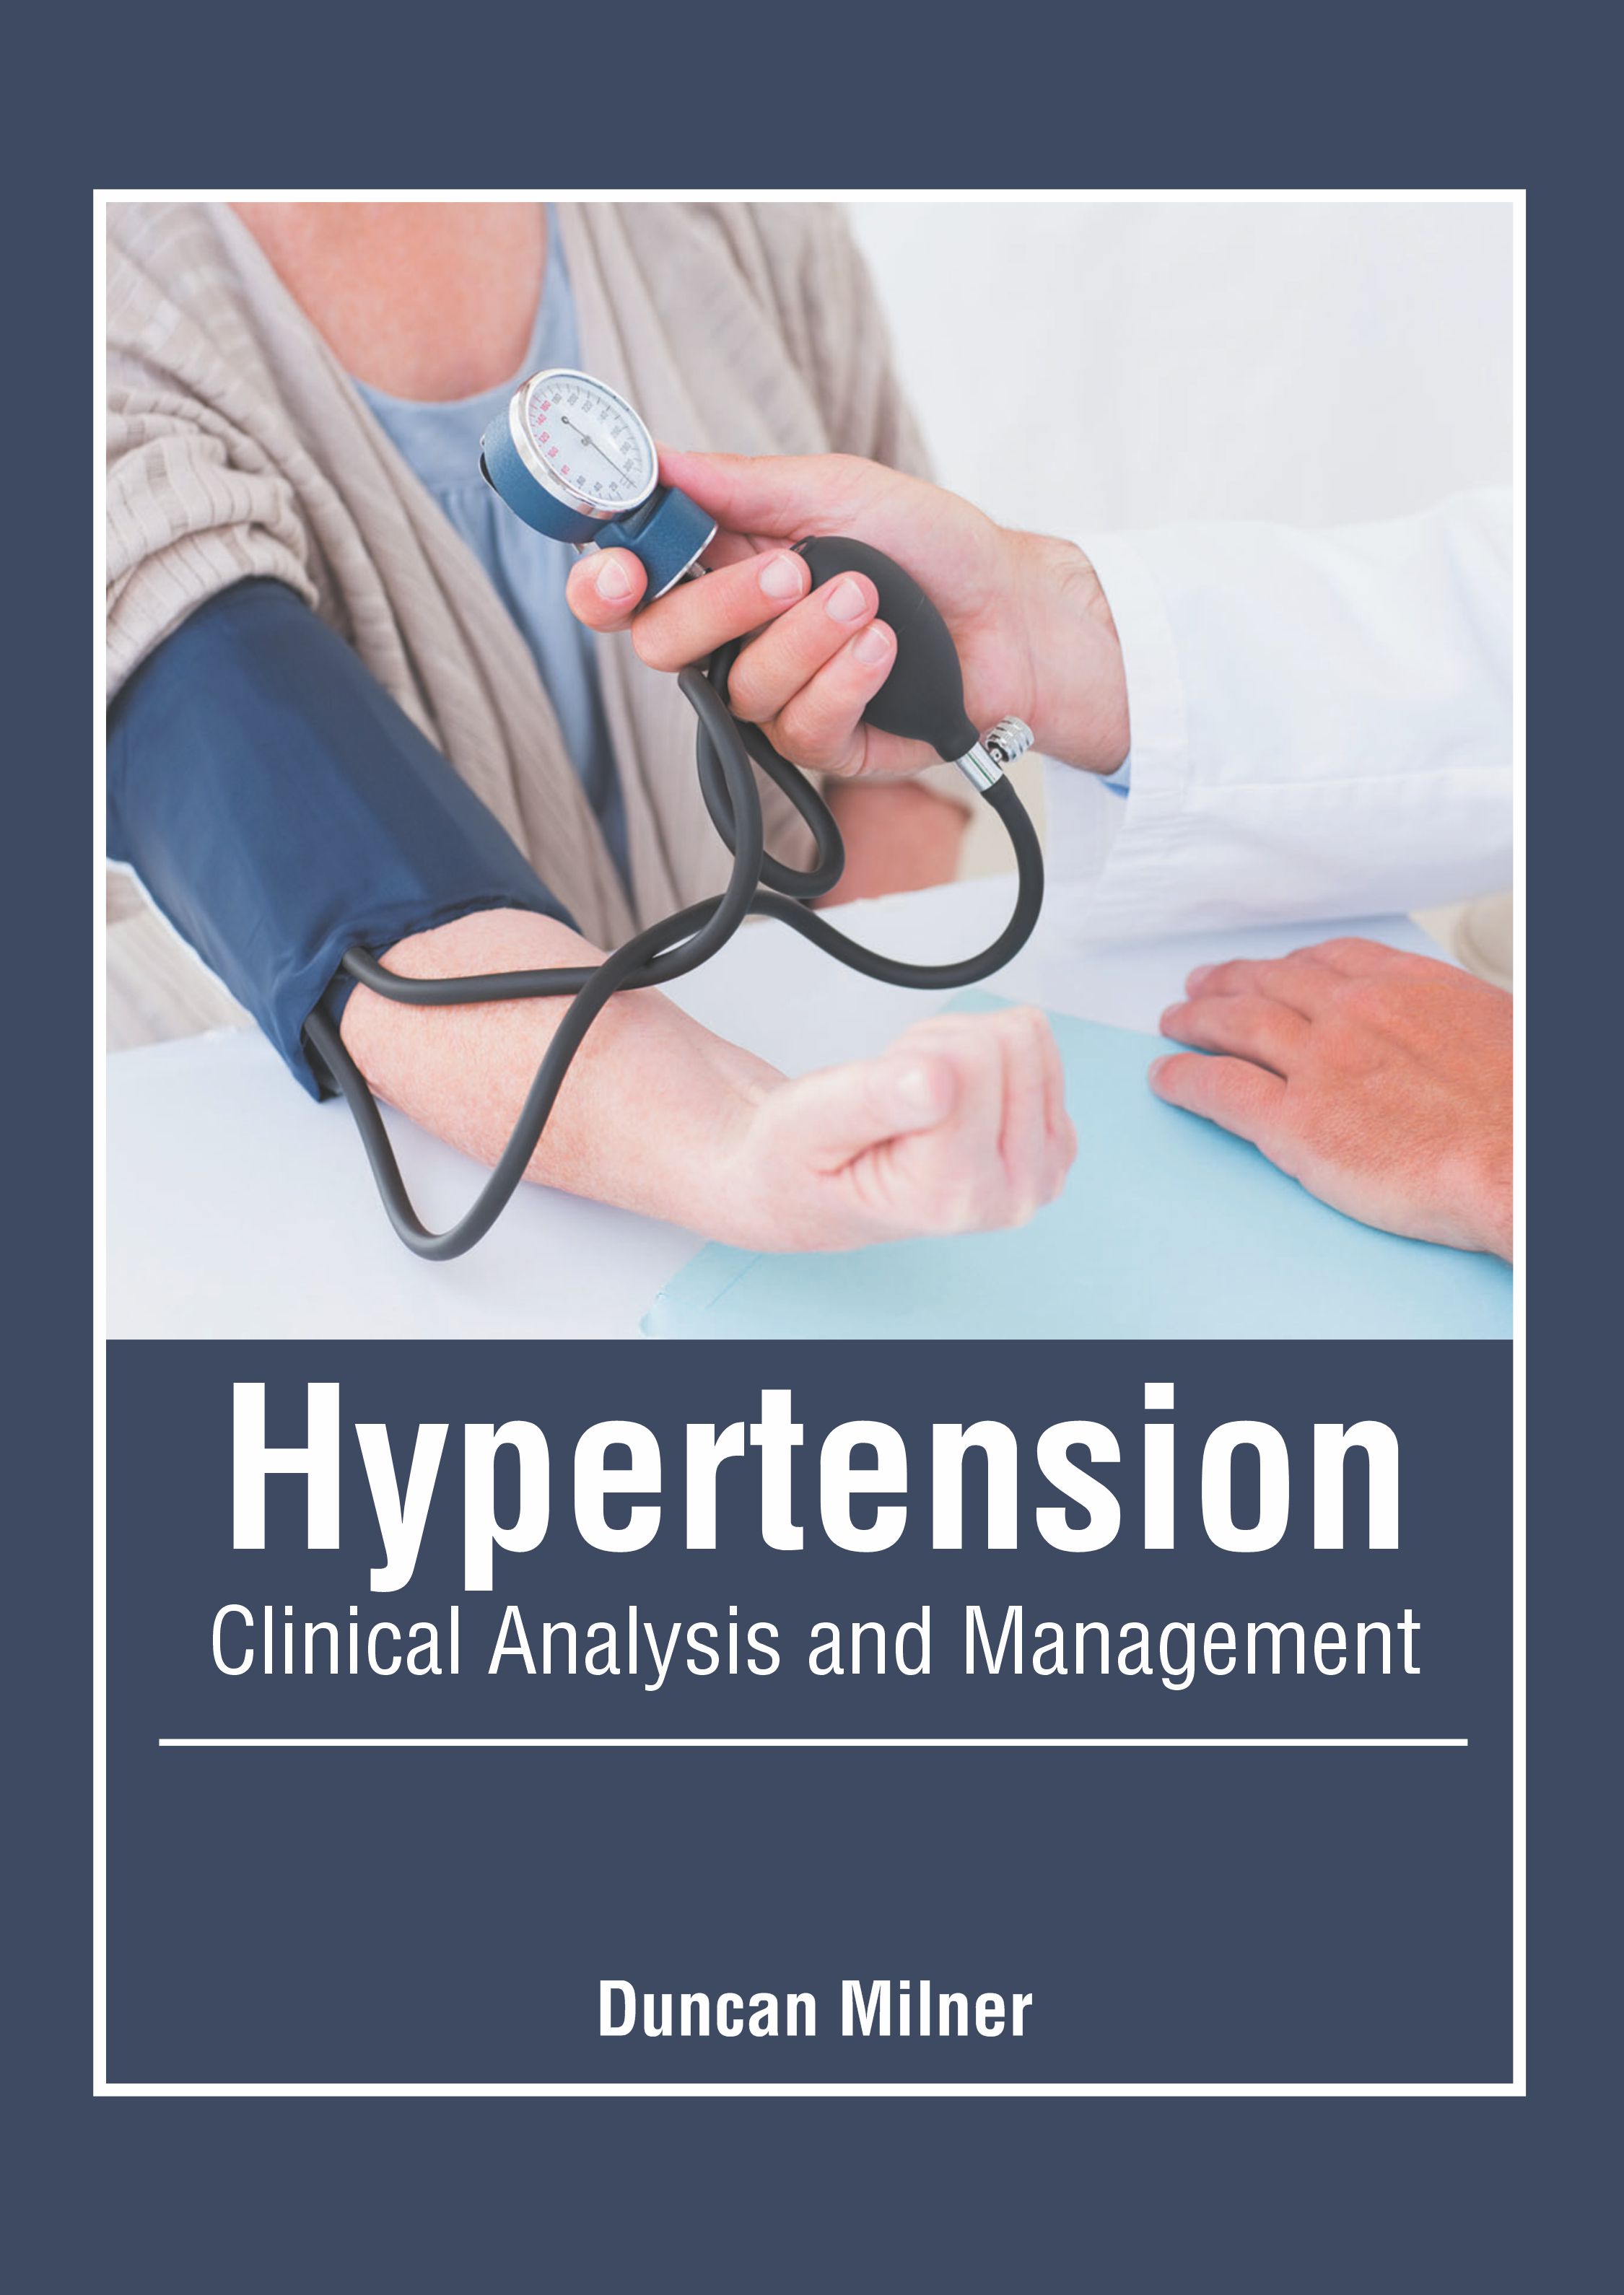 HYPERTENSION: CLINICAL ANALYSIS AND MANAGEMENT